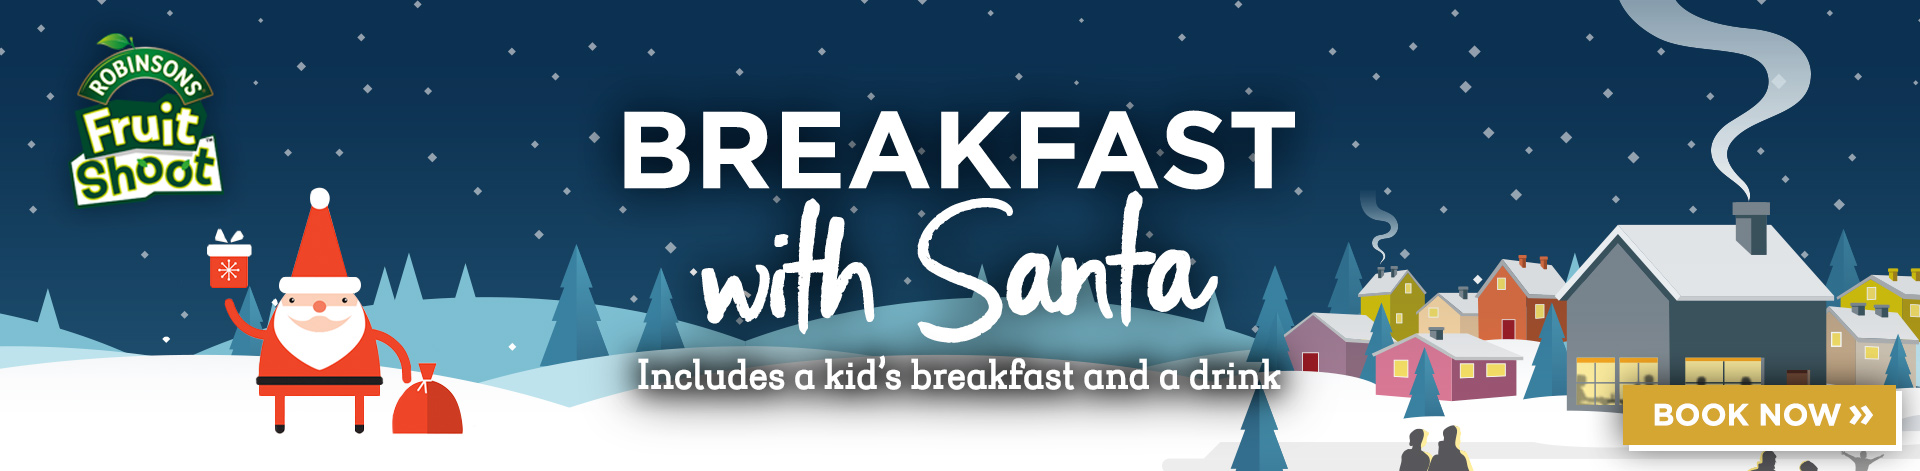 Breakfast with Santa menu at The Pig & Whistle